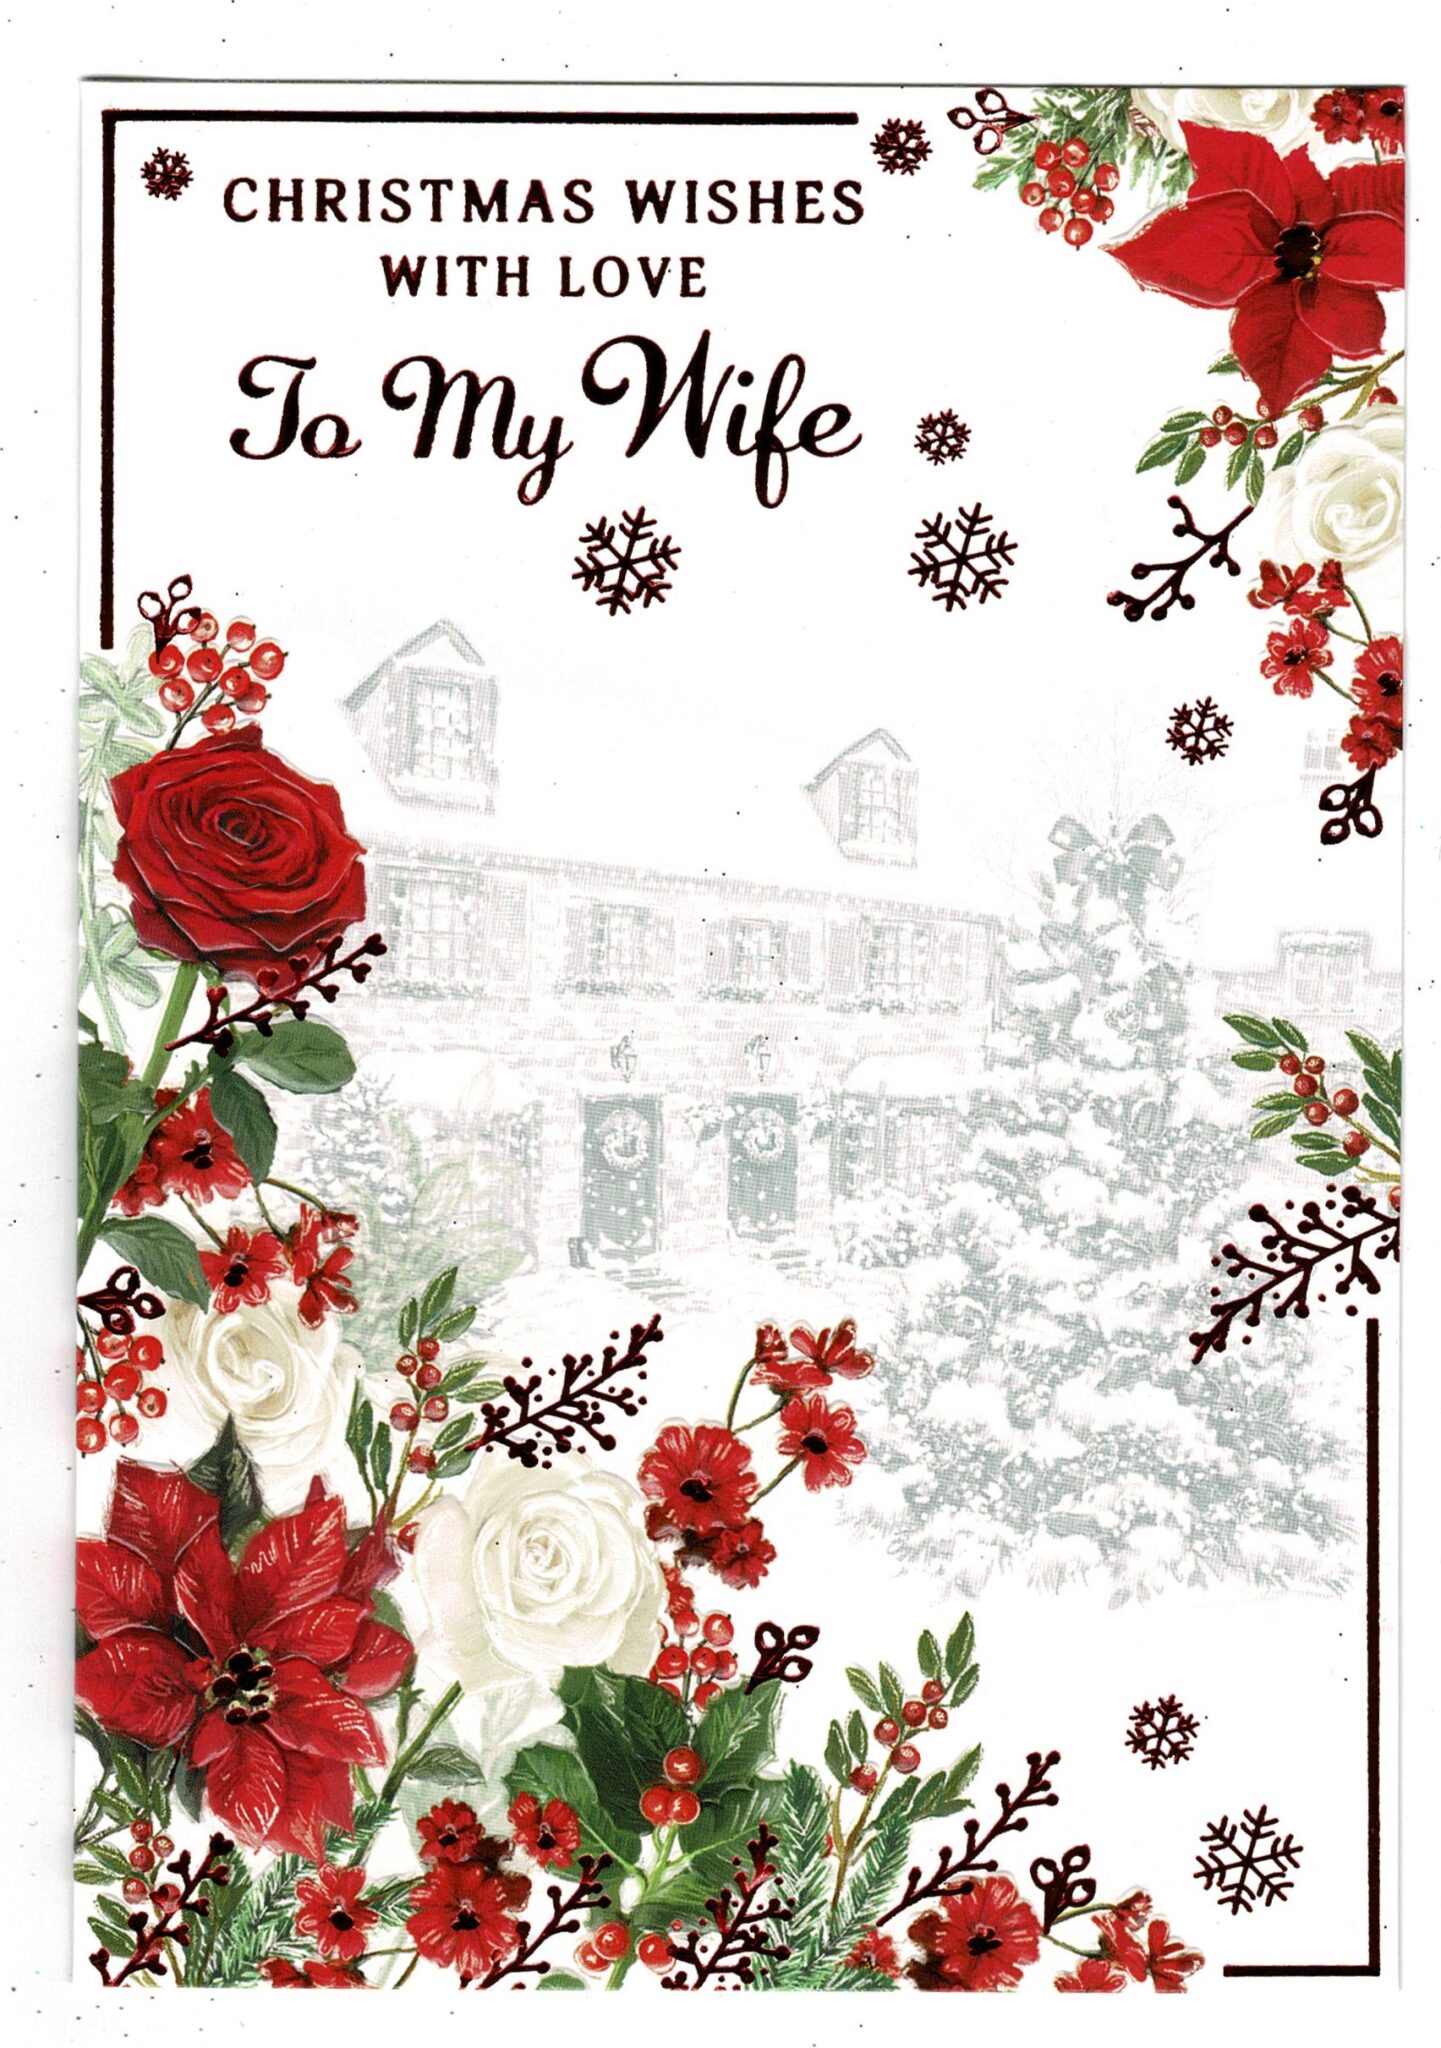 Wife Christmas Card ' Christmas Wishes With Love To My Wife' With